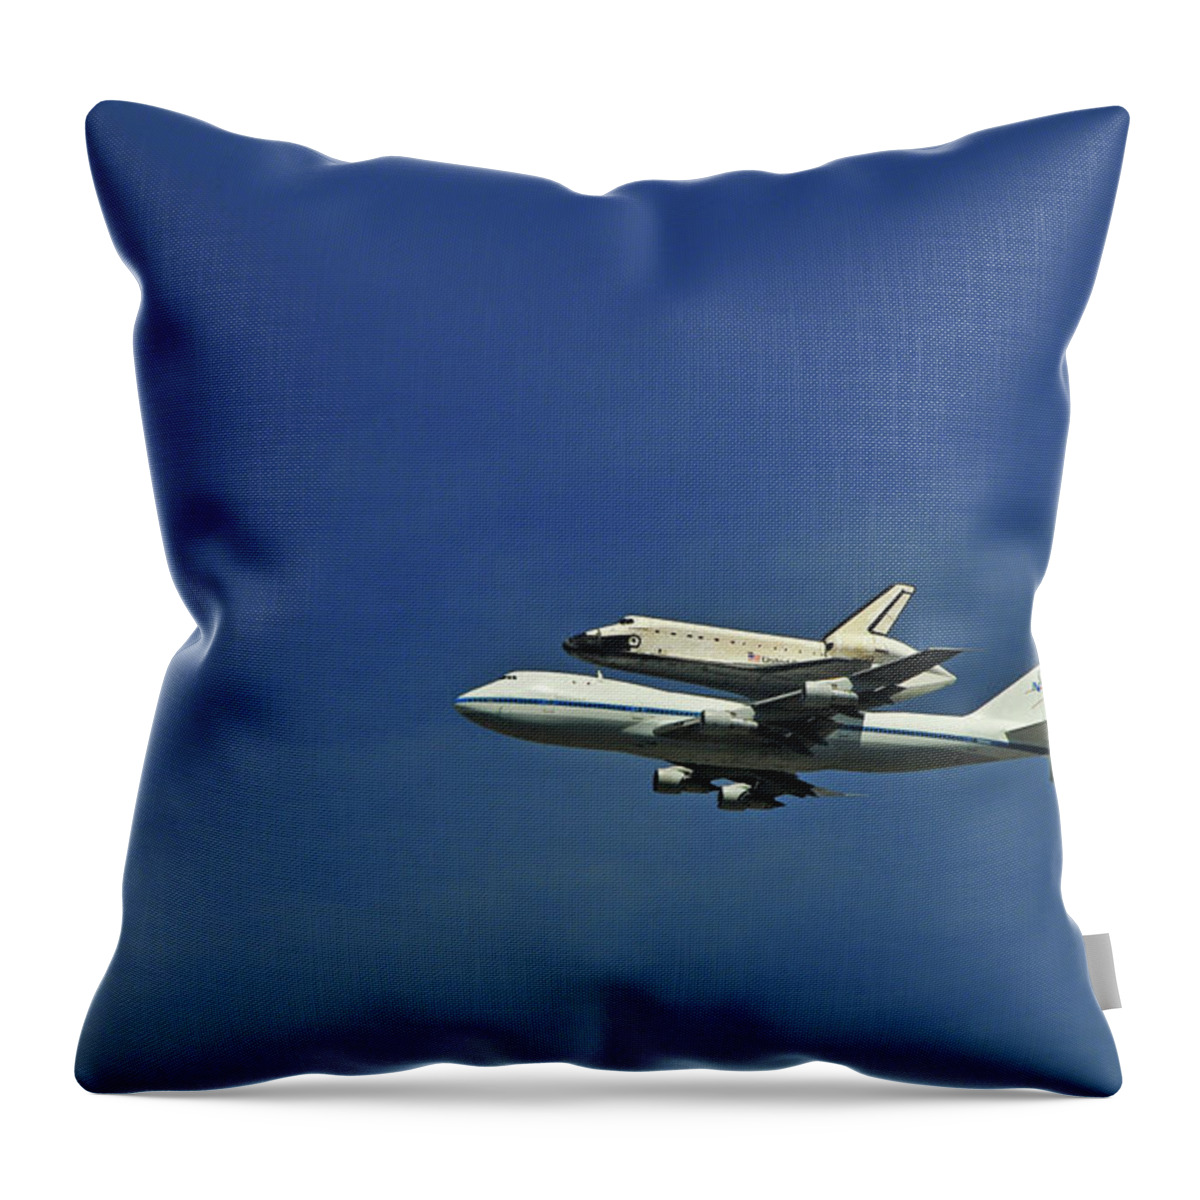 Teamwork Throw Pillow featuring the photograph Final Flight Of The Space Shuttle by Mitch Diamond